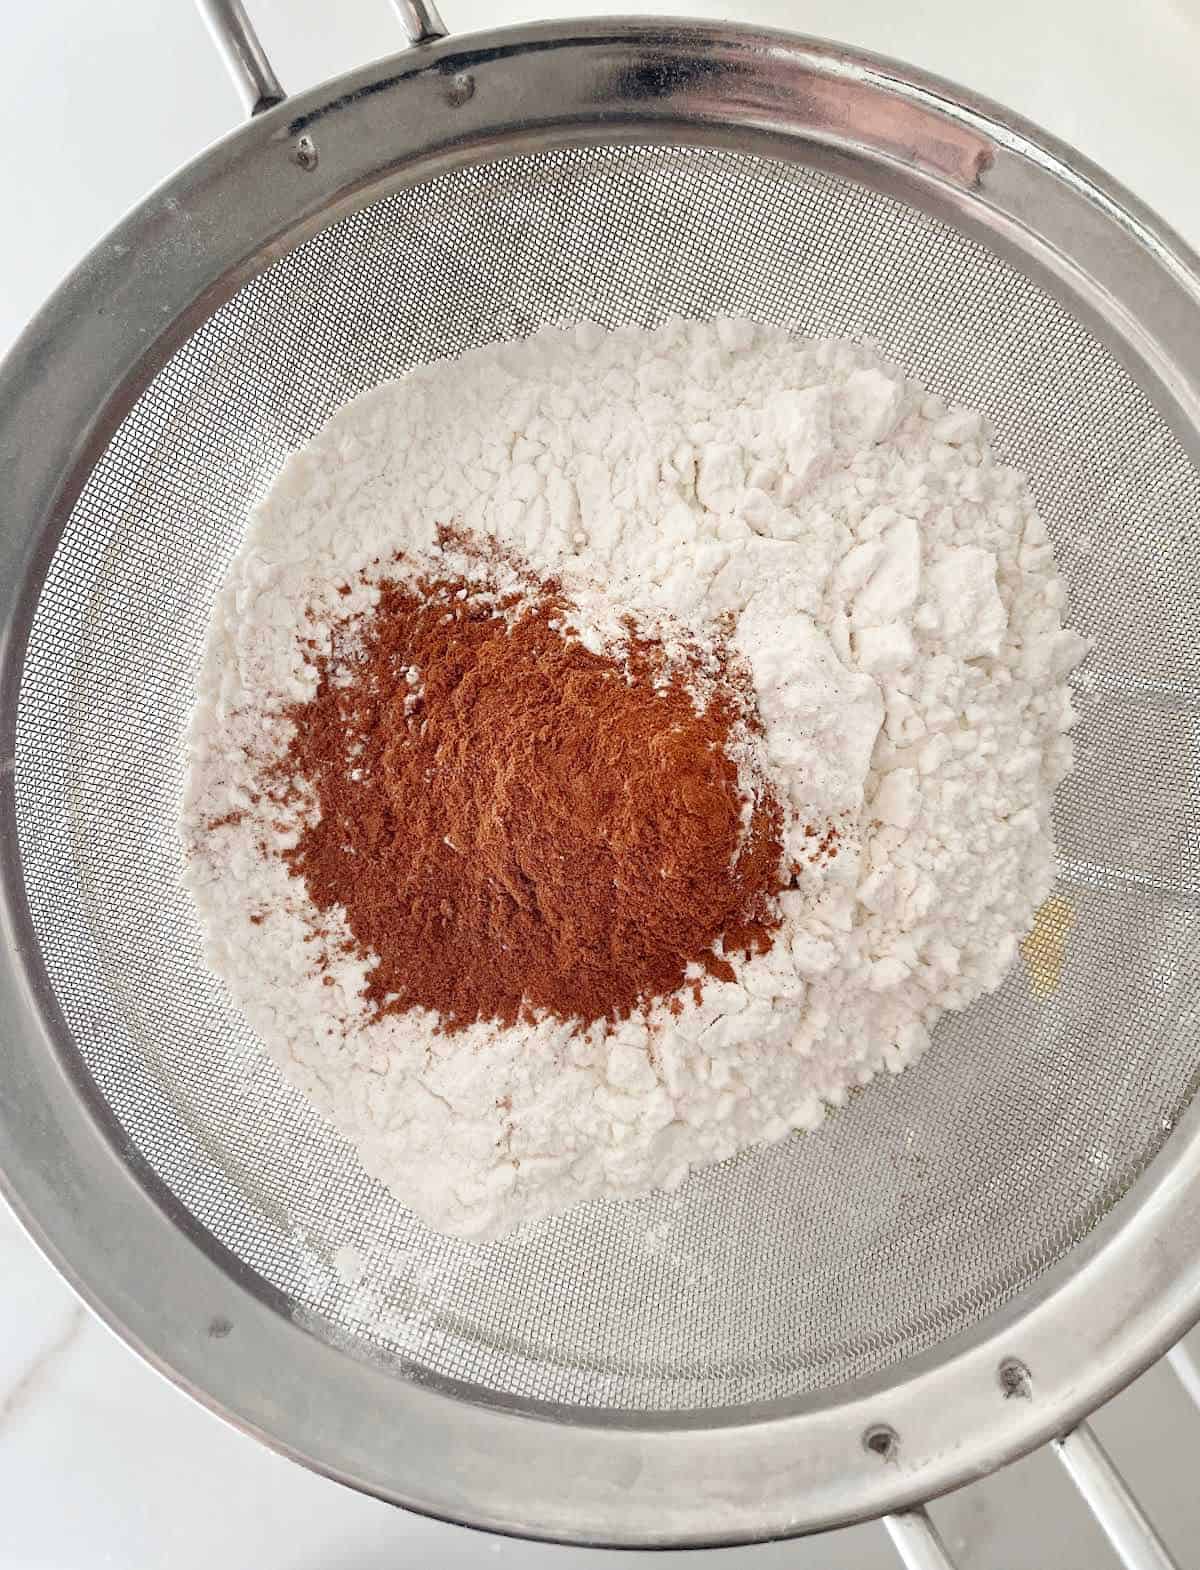 Flour mixture and cinnamon being sifted. Close up top view image.